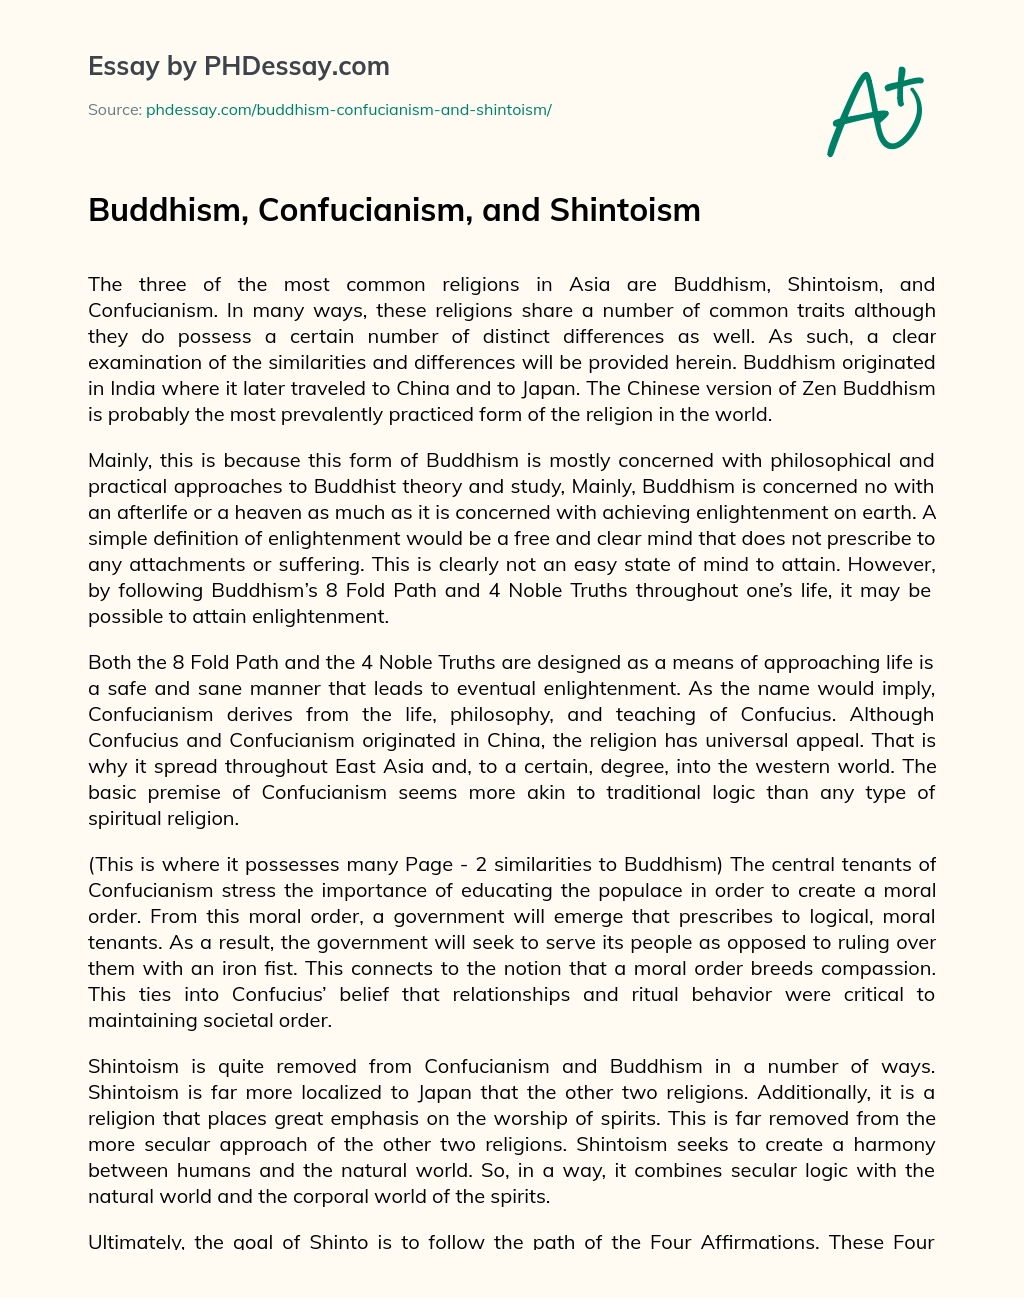 Buddhism, Confucianism, and Shintoism essay